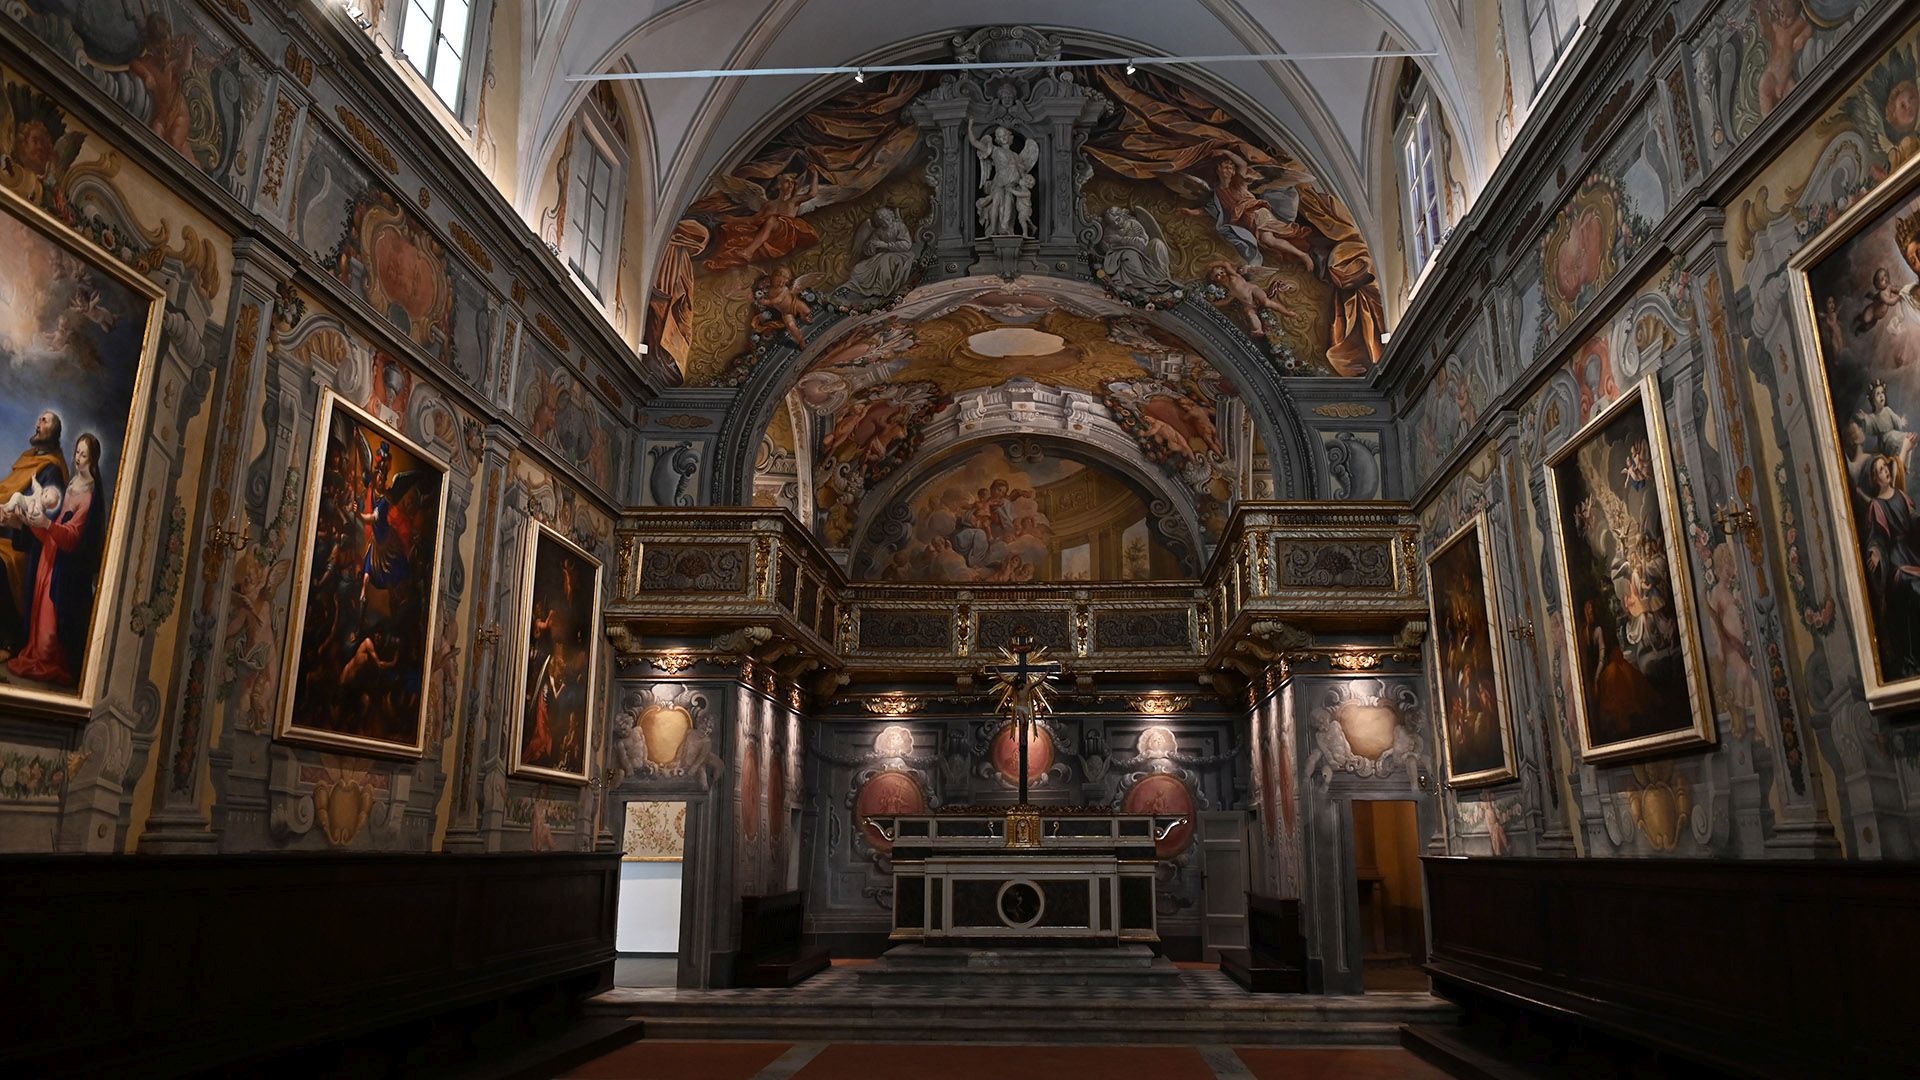 The Oratory of the Guardian Angels in lucca. inside view